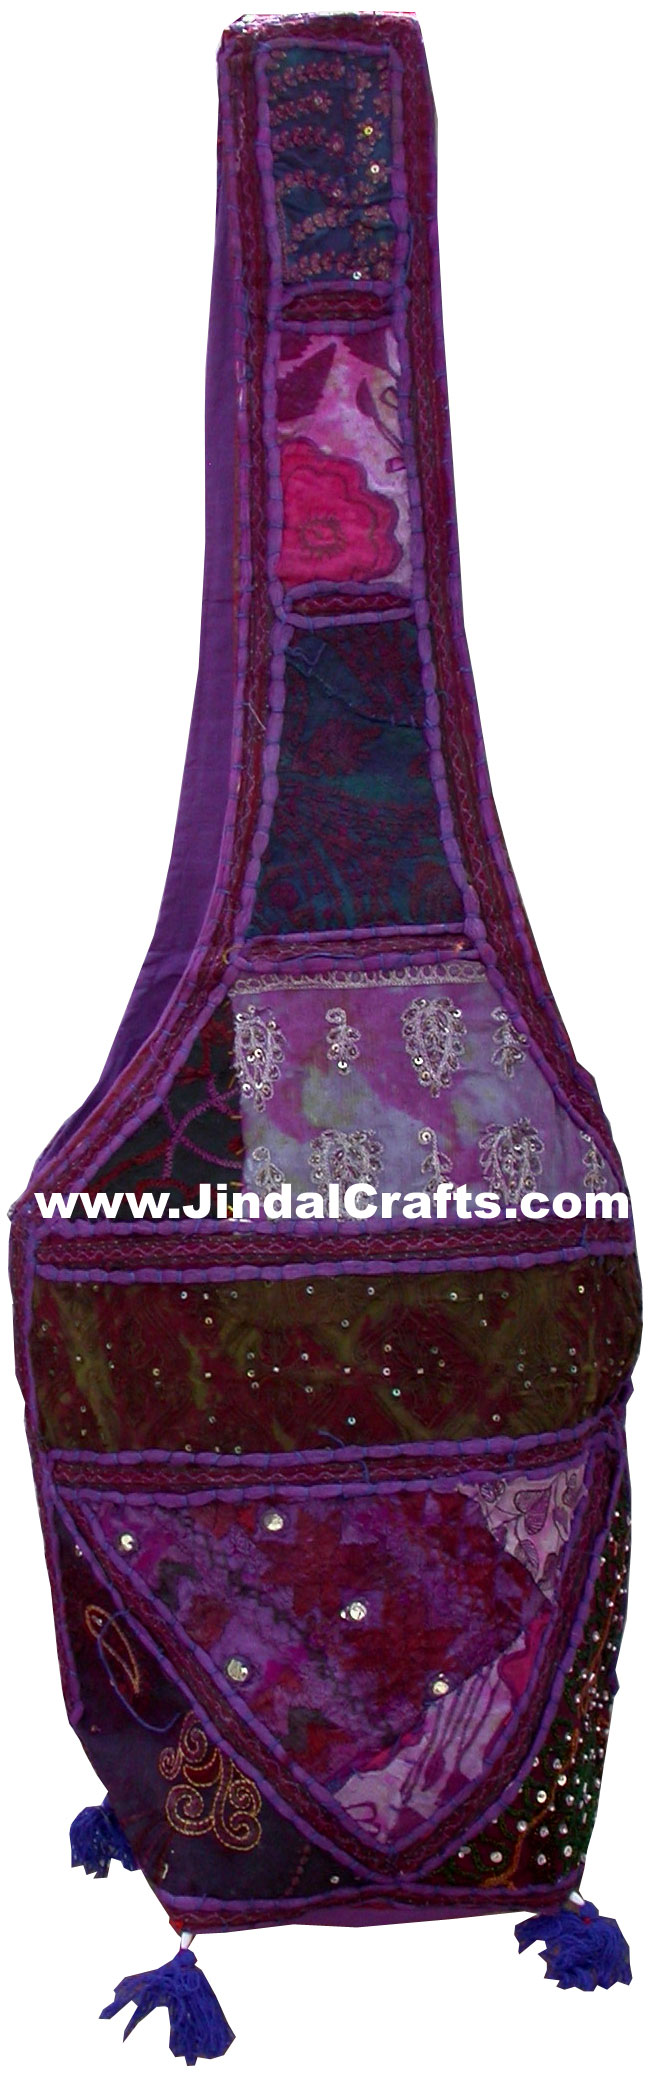 Colourful Hand Embroidered Trible Handbag from India 100 % Cotton Fabric Art